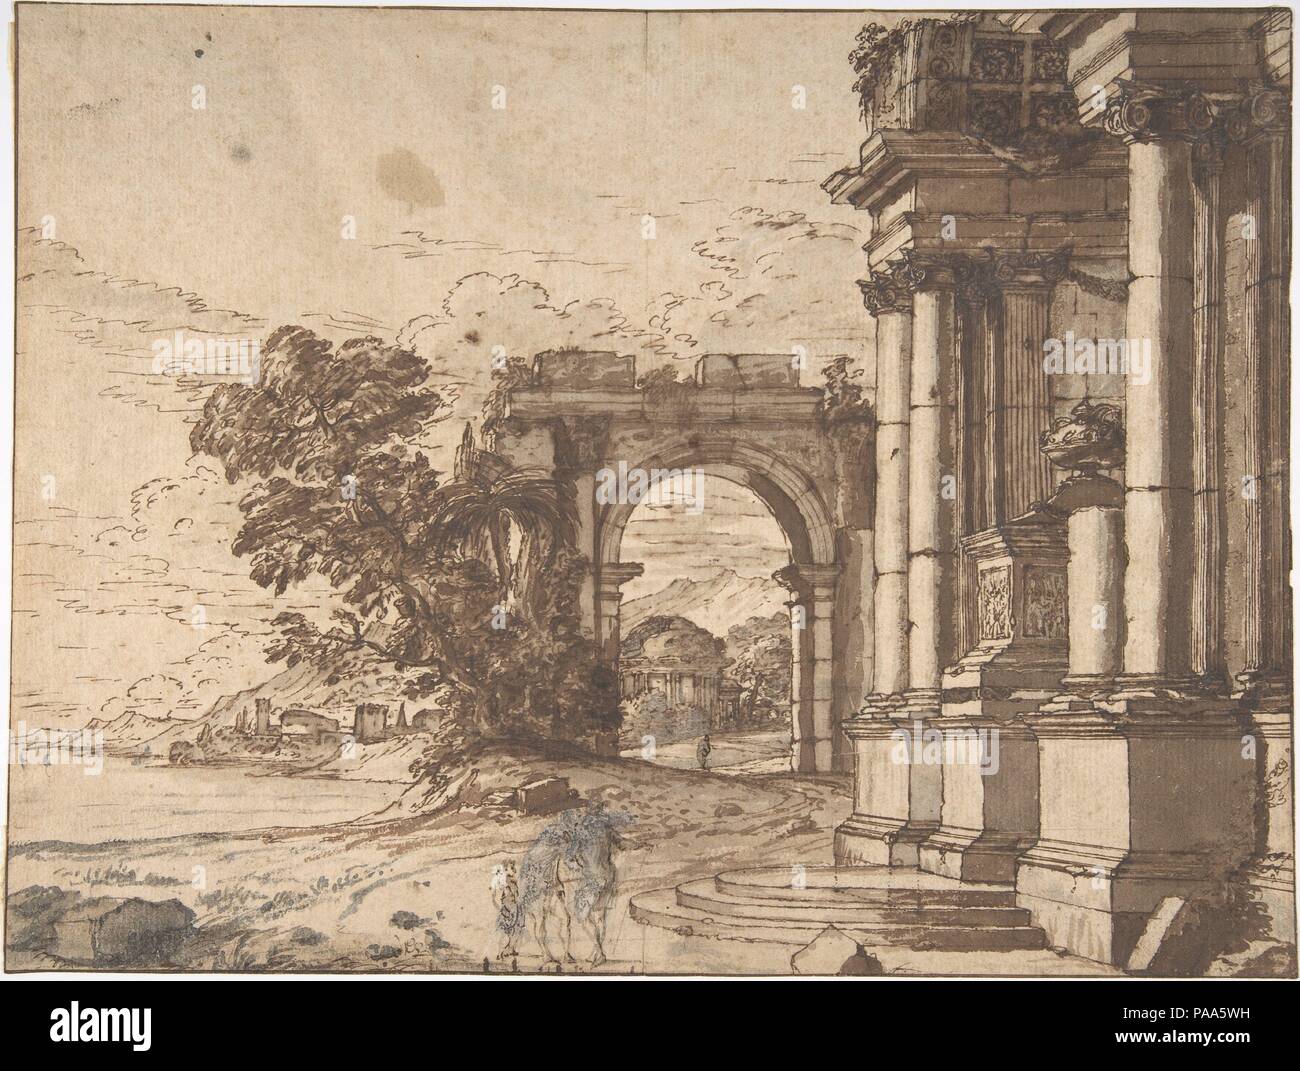 Landscape with Classical Architecture by a Lake. Artist: Anonymous, French, 17th century. Dimensions: 9 3/4 x 12 7/8 in.  (24.8 x 32.7 cm). Date: 17th century. Museum: Metropolitan Museum of Art, New York, USA. Stock Photo